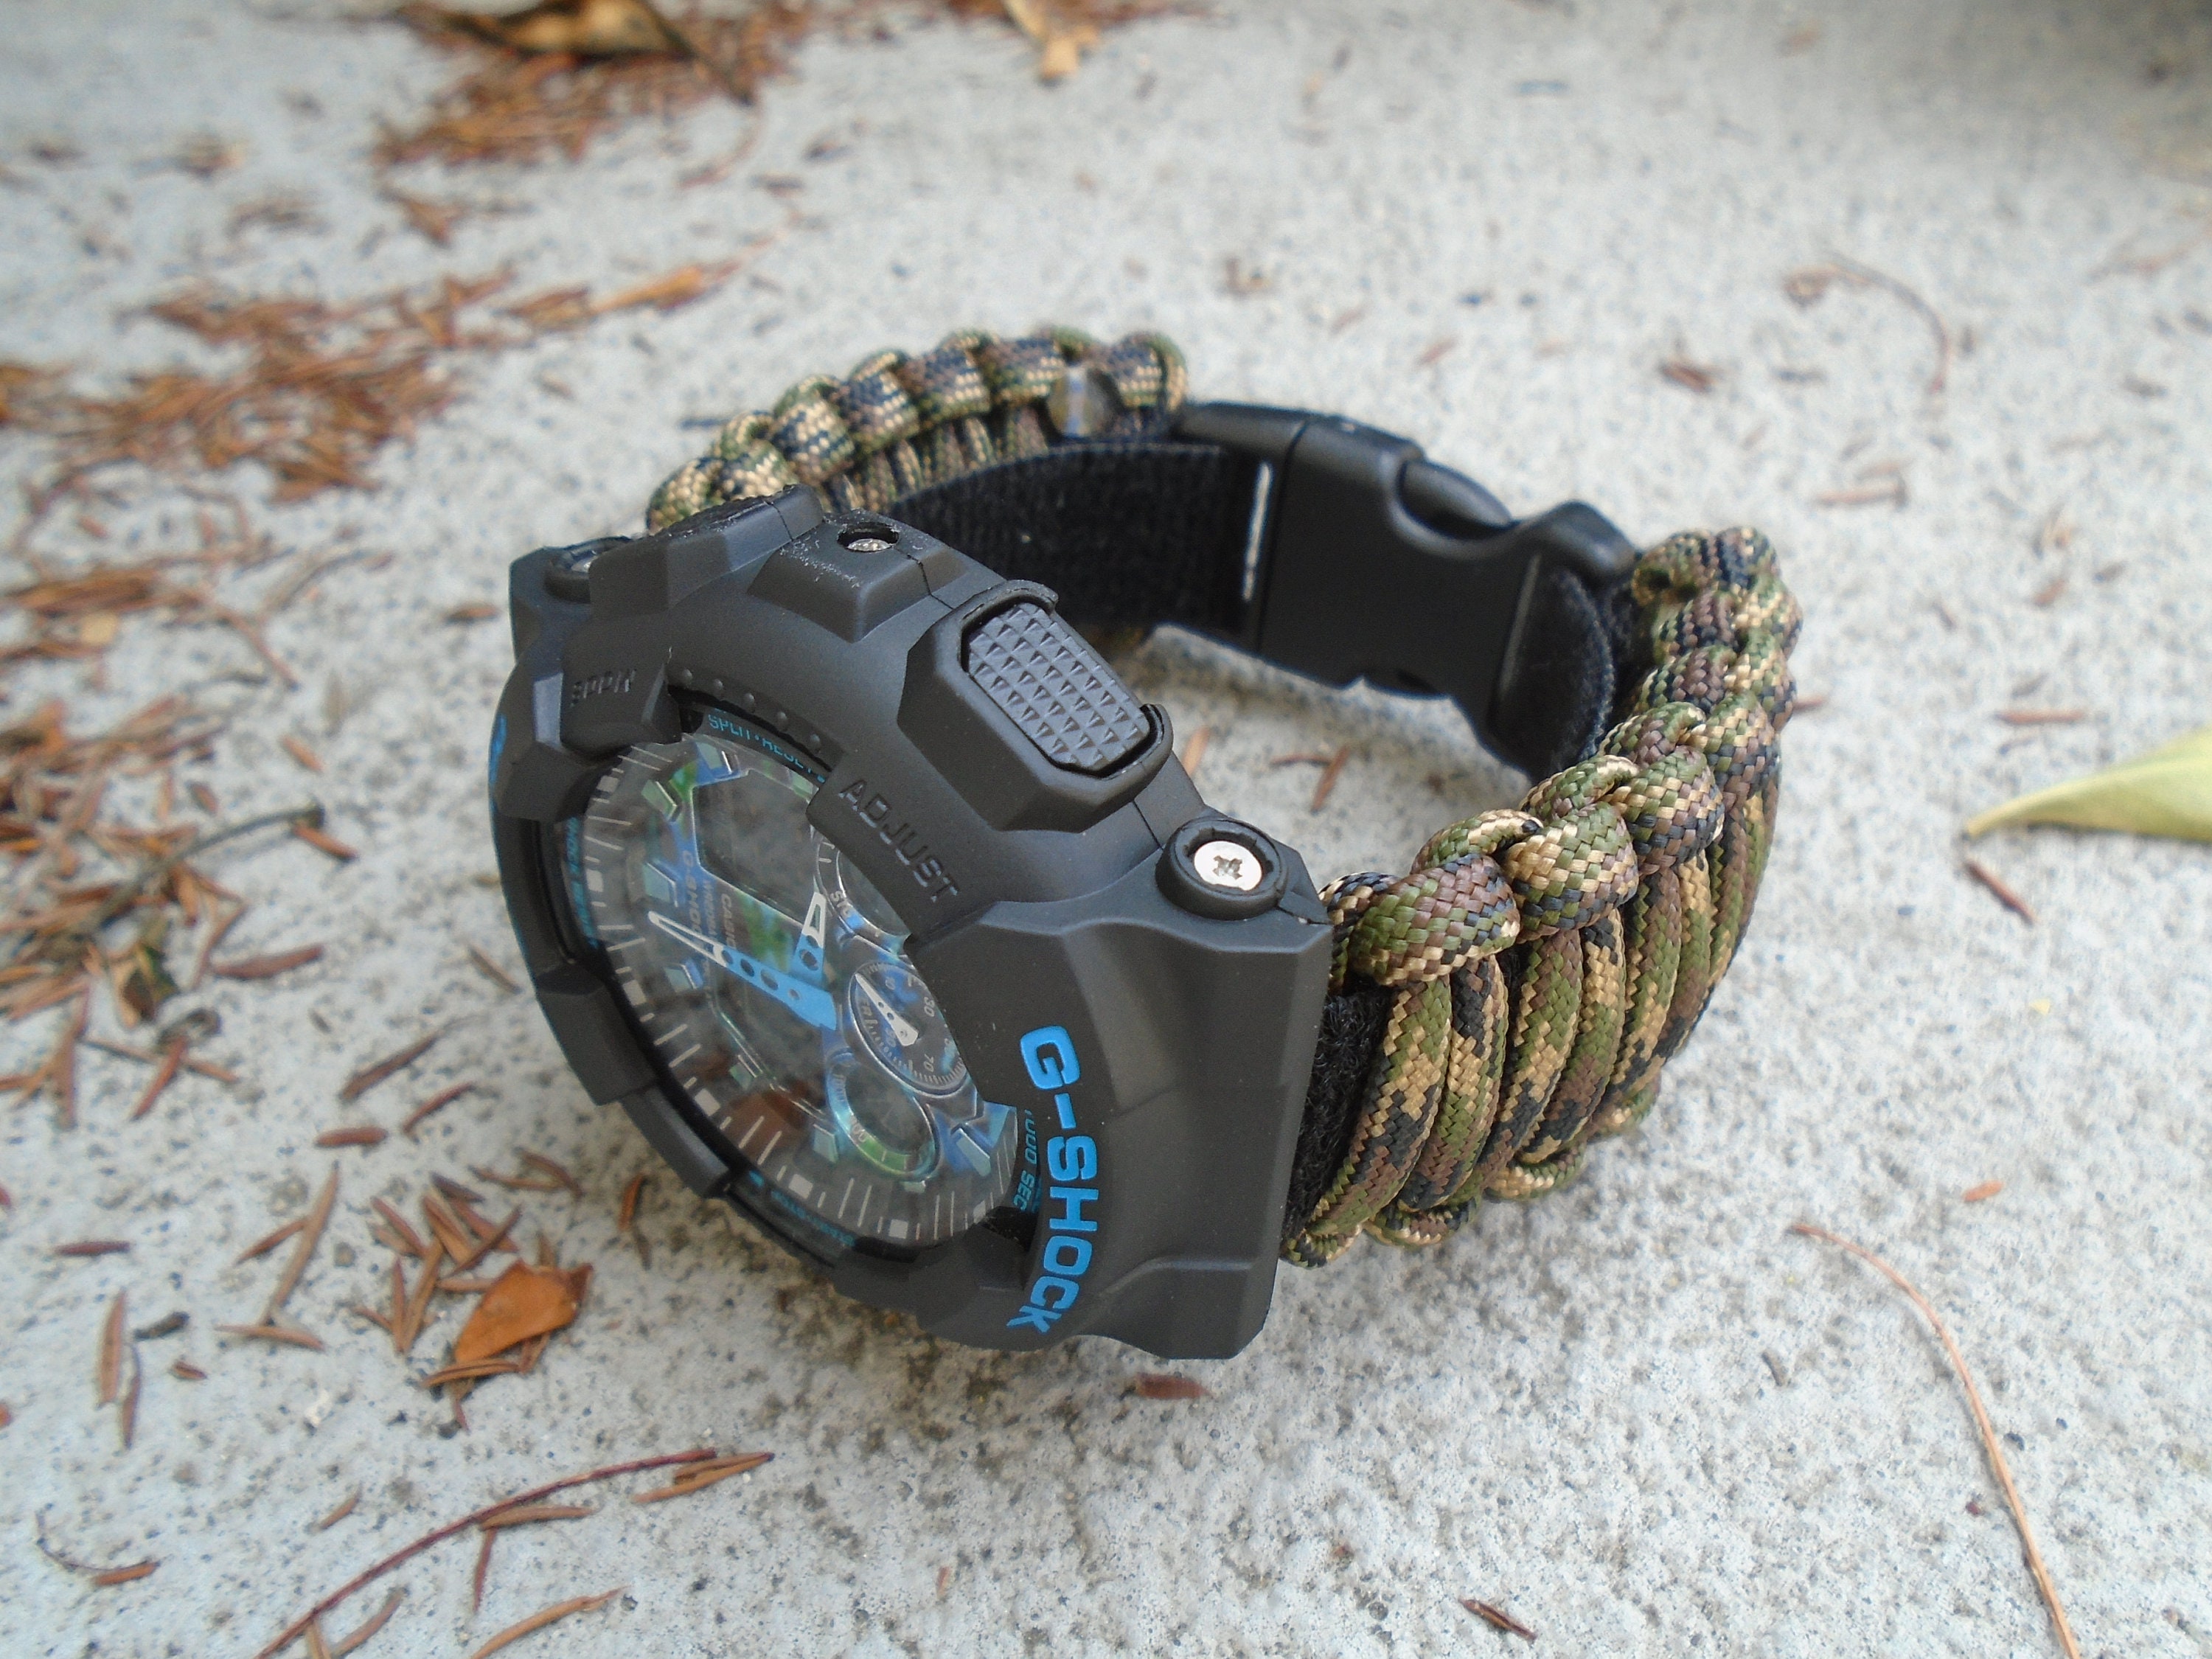 Everyday Jewelry Blue Green White and Black Nylon Paracord Bracelet Jewelrys - Bracelet, Nylon Paracord Plastic, Multicolored, 18mm Wide Survival Camo